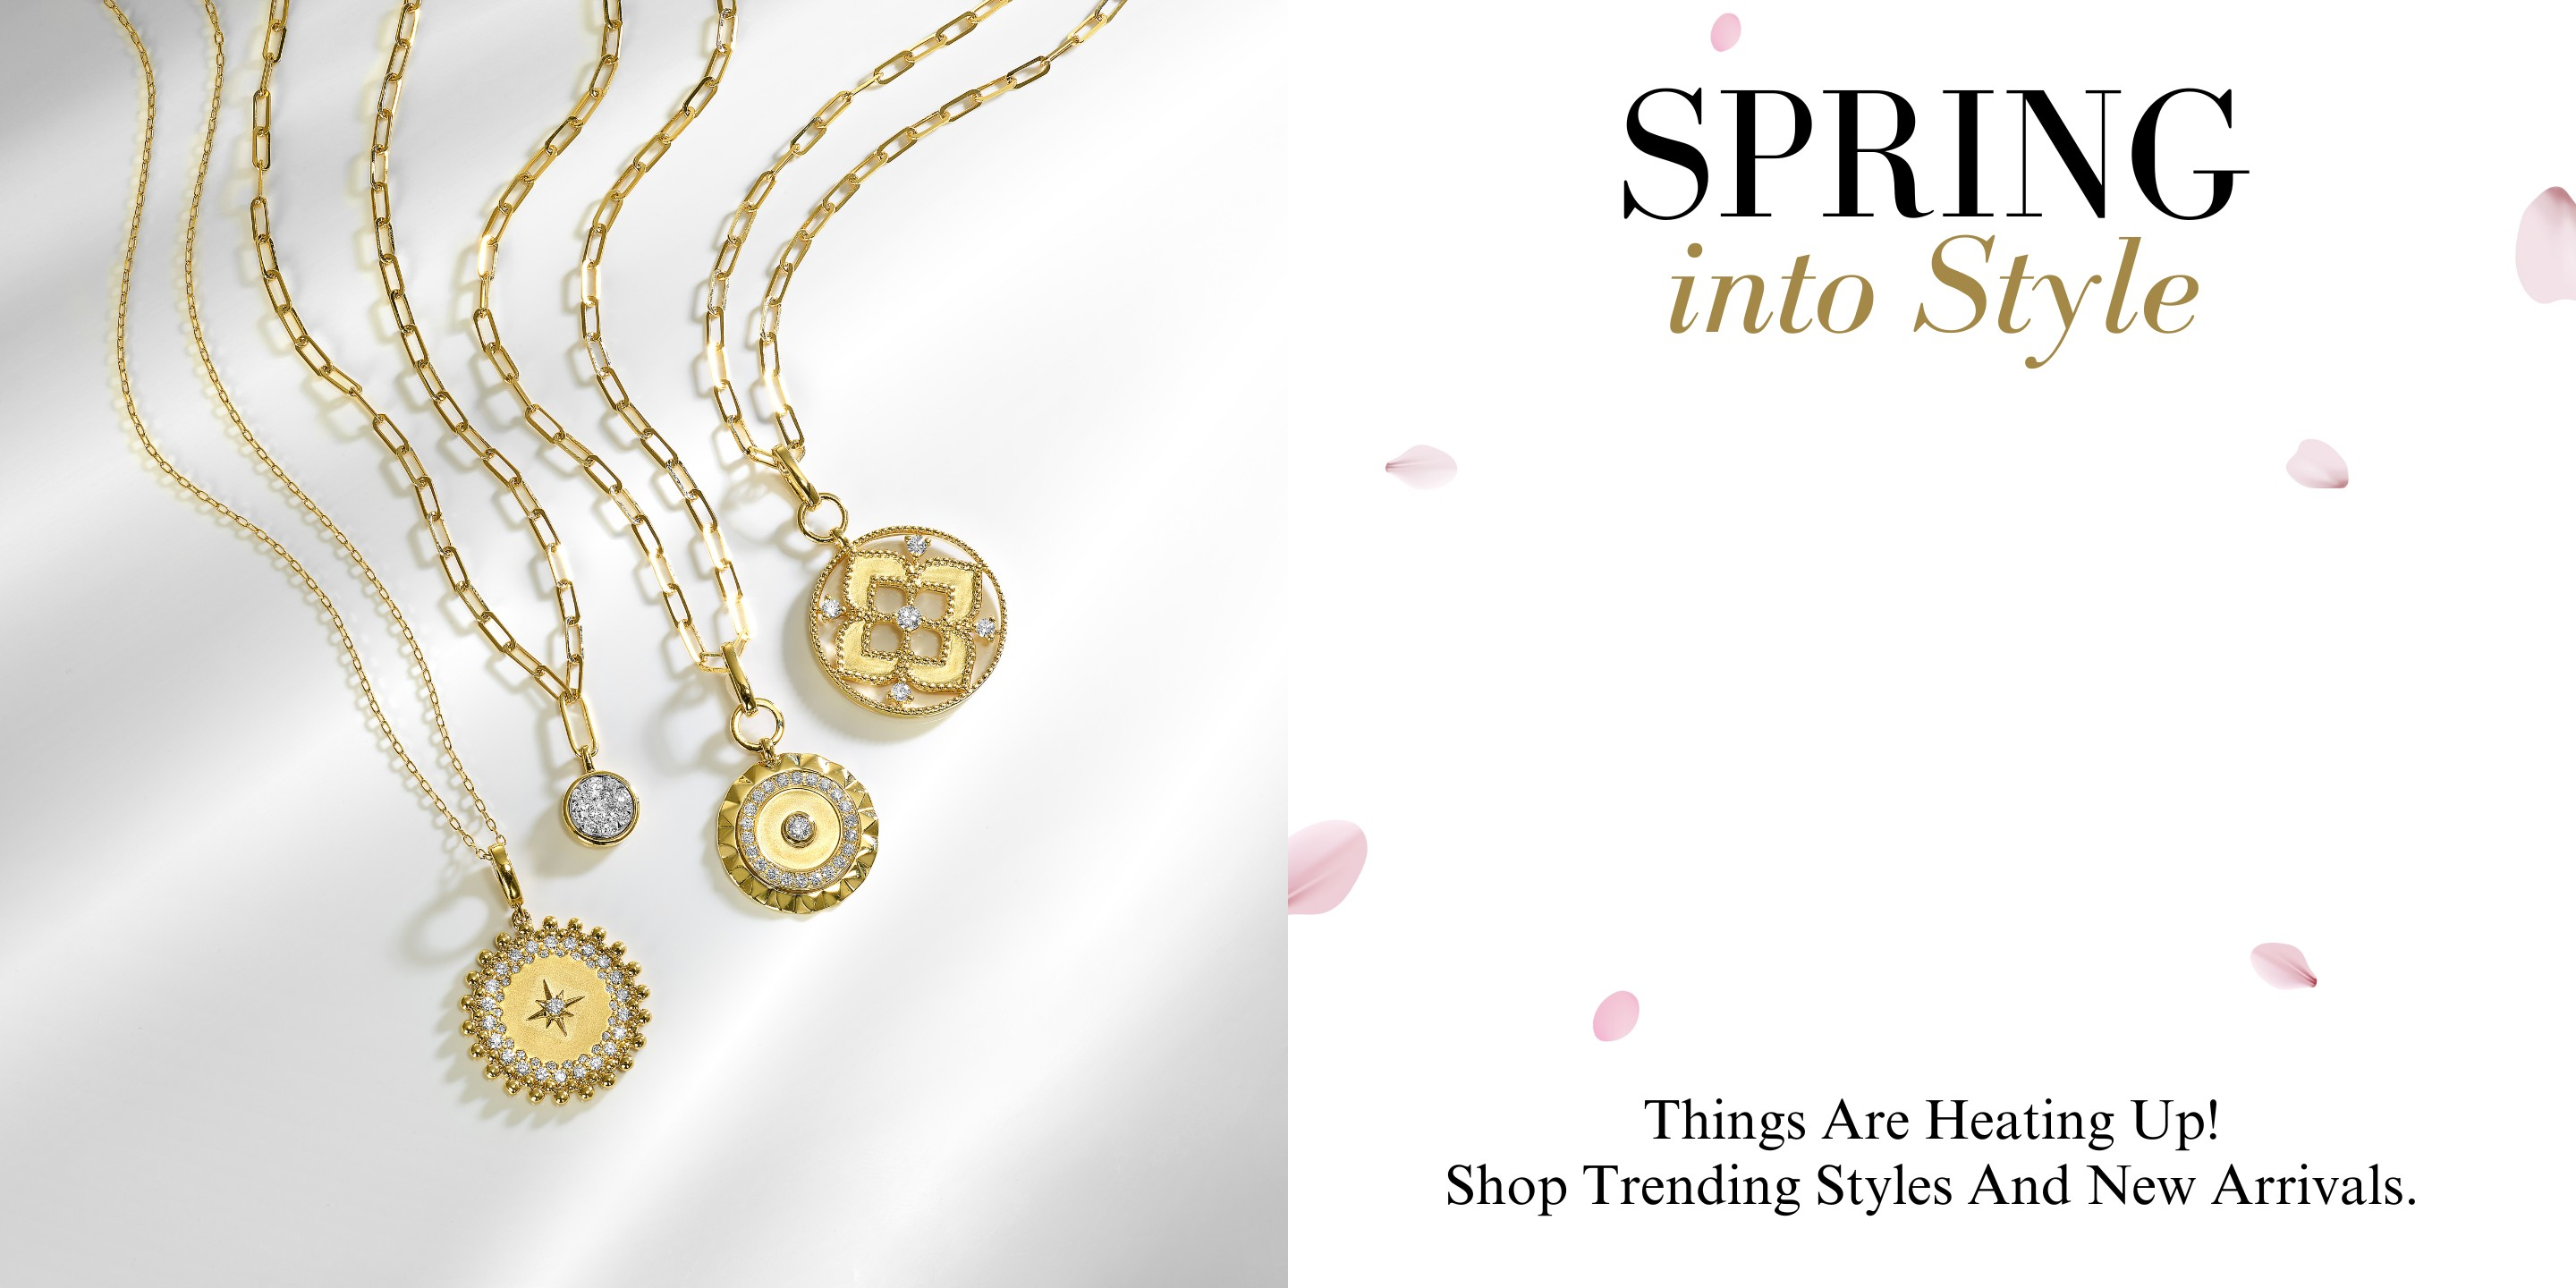 Robert Irwin Jewelers in Memphis, TN Spring Jewelry Sale. Save up to 50% Off plus free shipping!